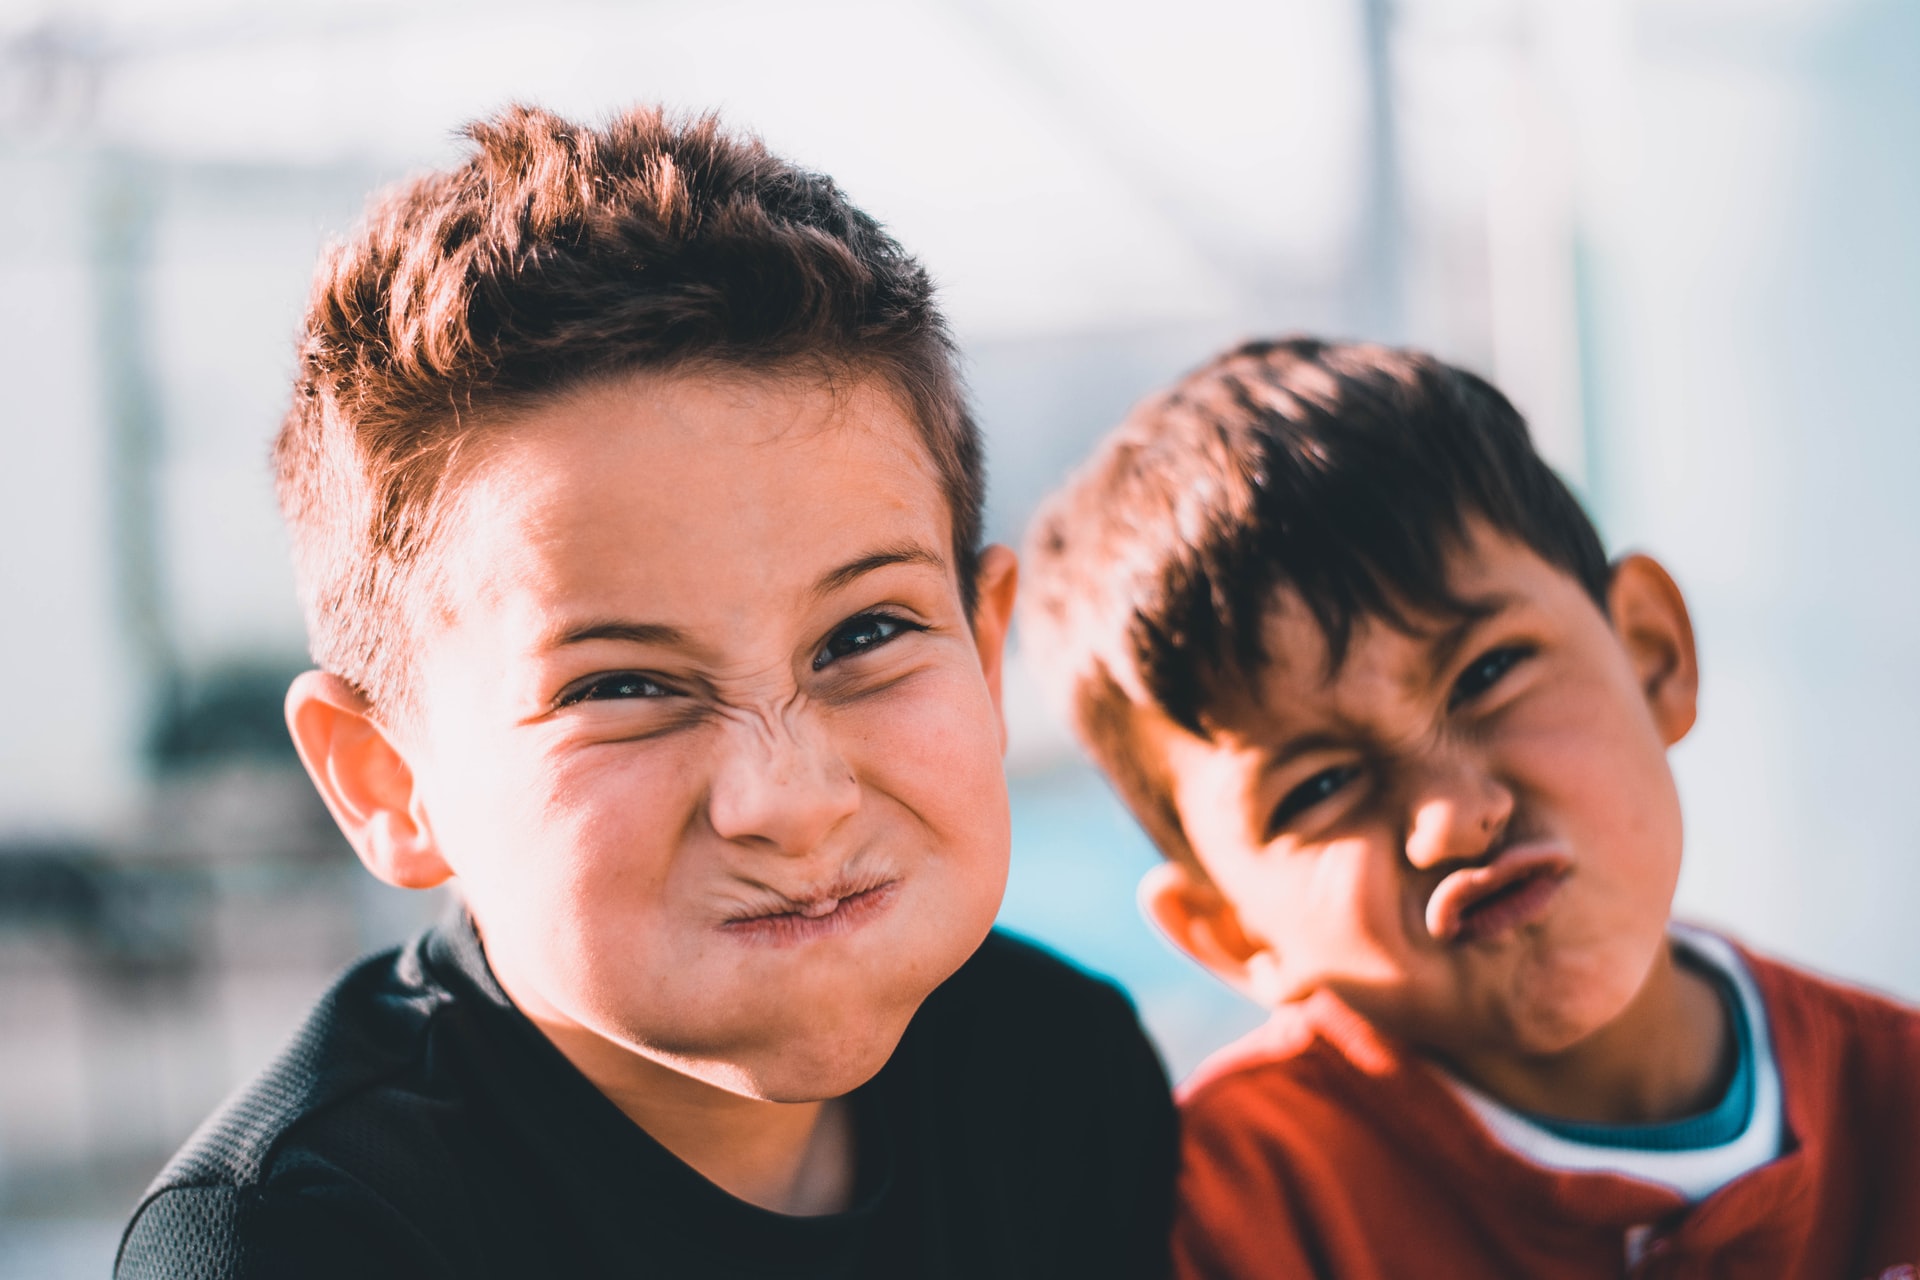 boys making faces mental health research pcmh